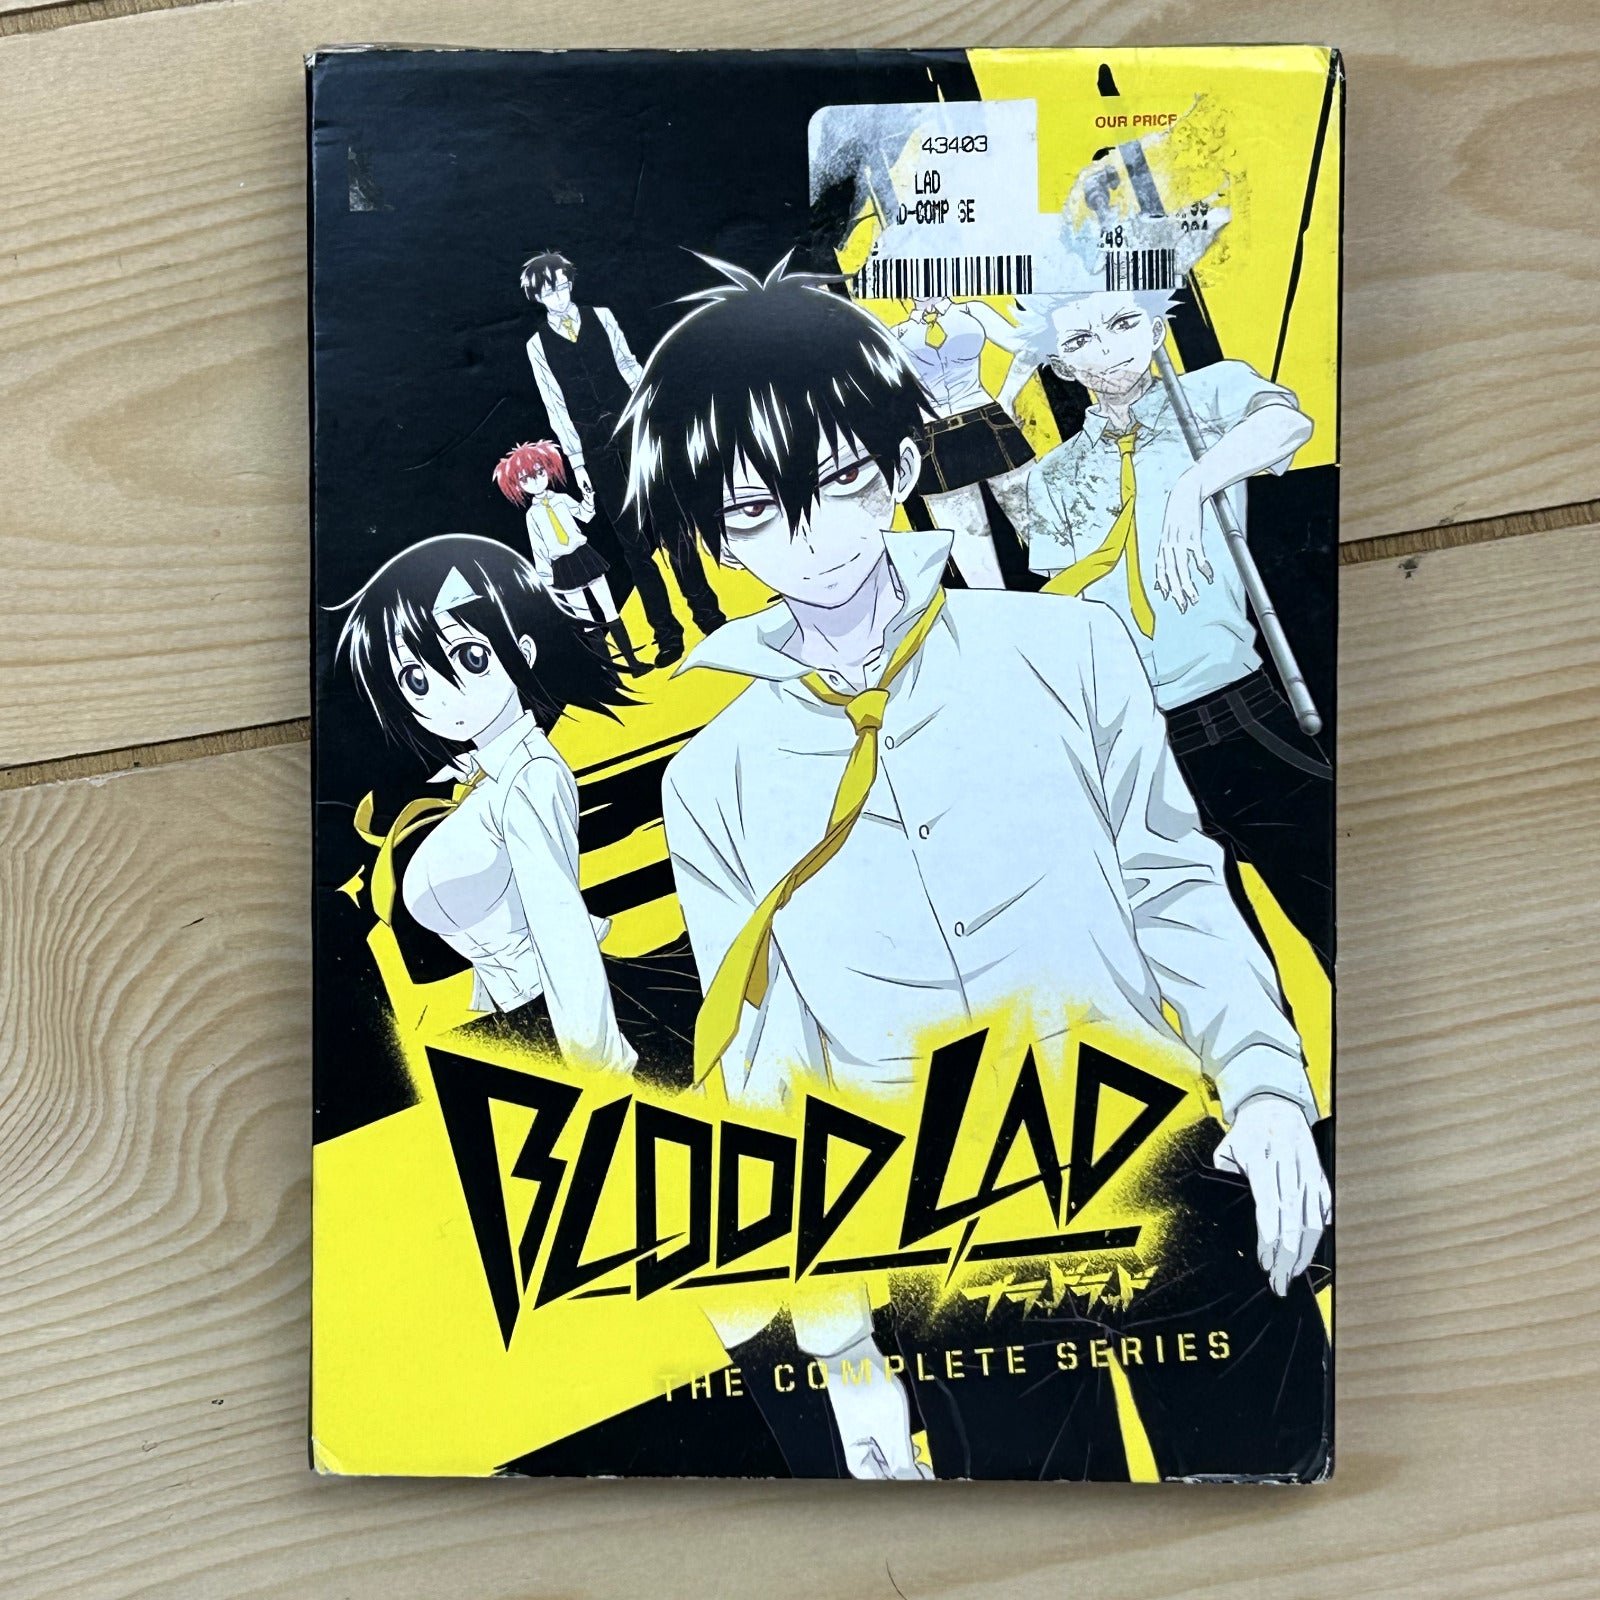 Blood Lad: The Complete Series 2 Pack Japanese Anime Subtitled Sealed Slipcover